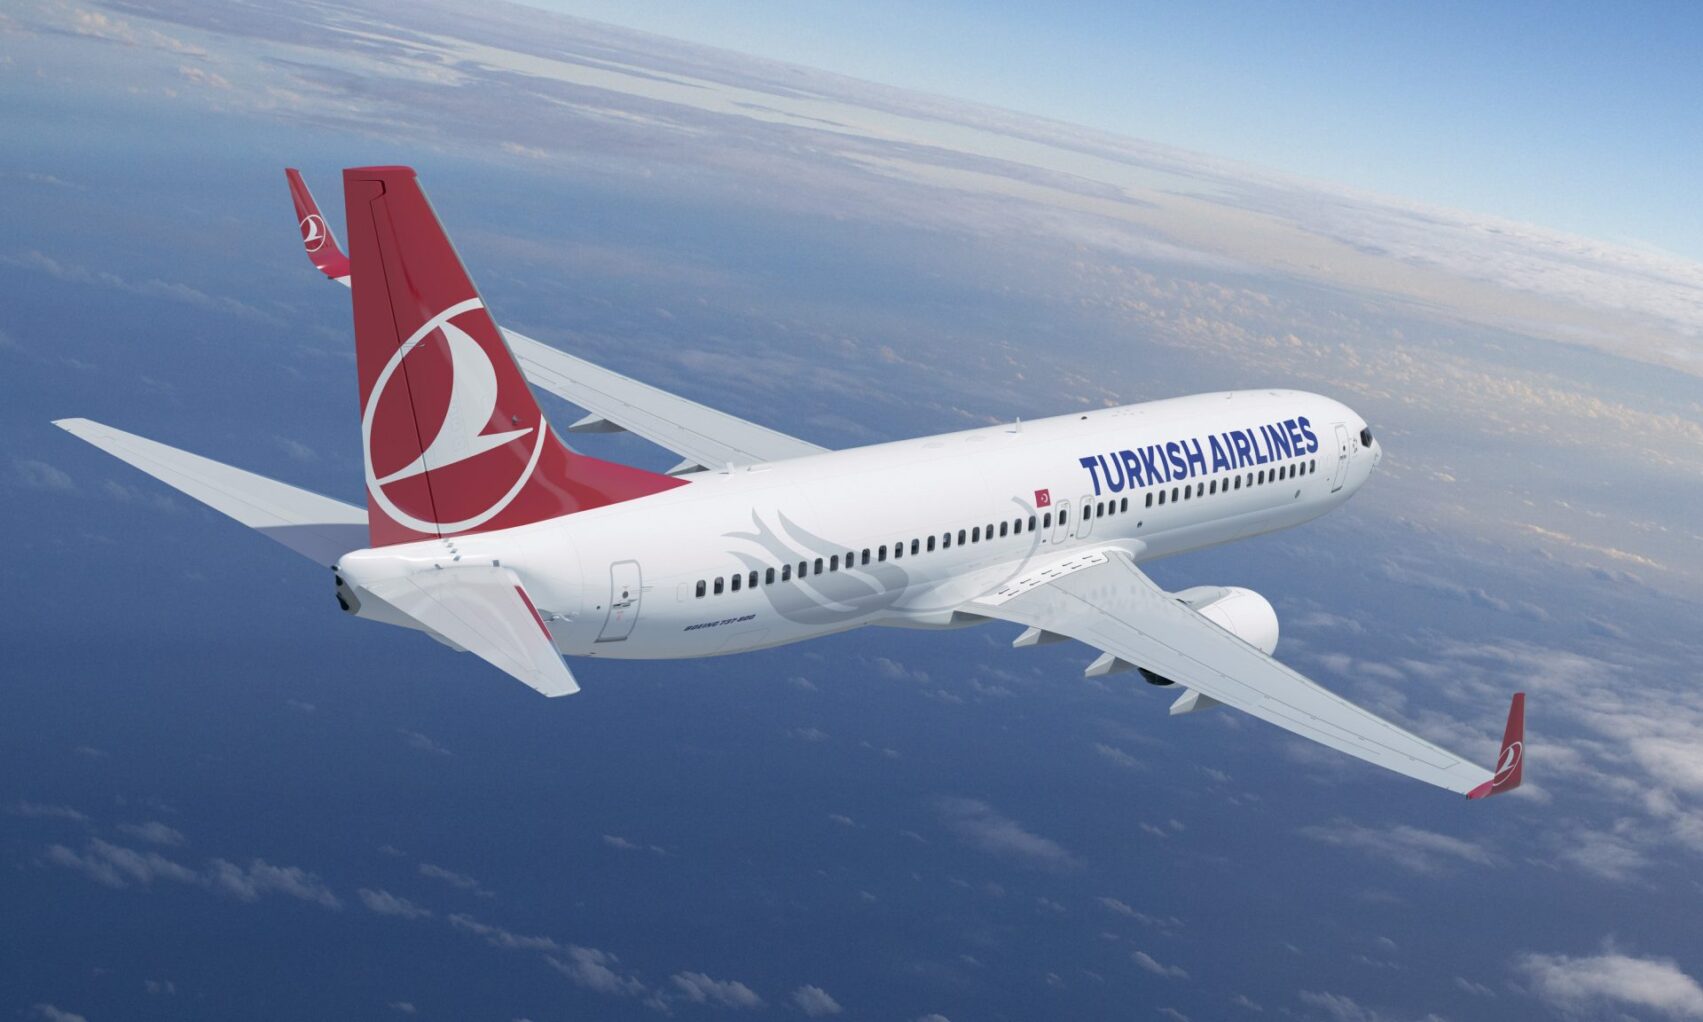 Turkish Airlines is shaking up the airline industry in Australia